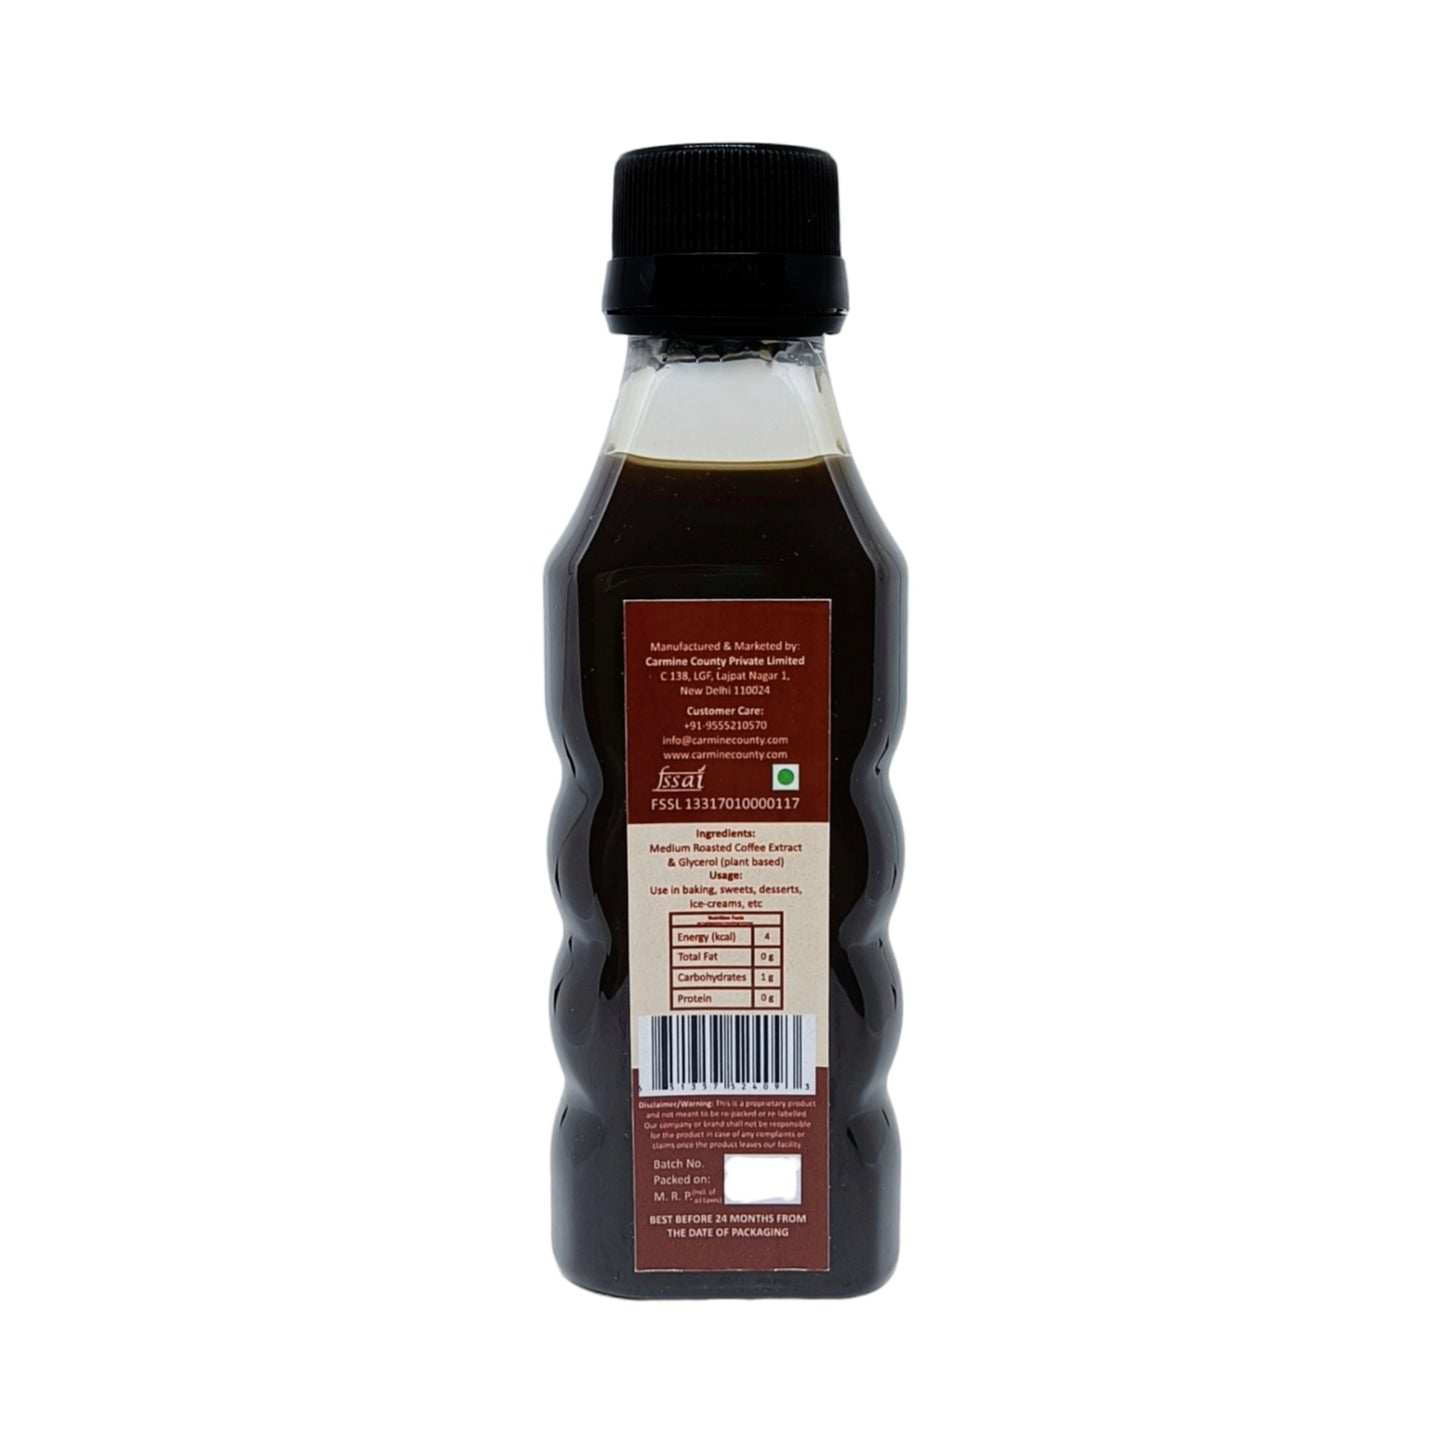 Carmine County All Natural Roasted Coffee Bean Extract 100 ml